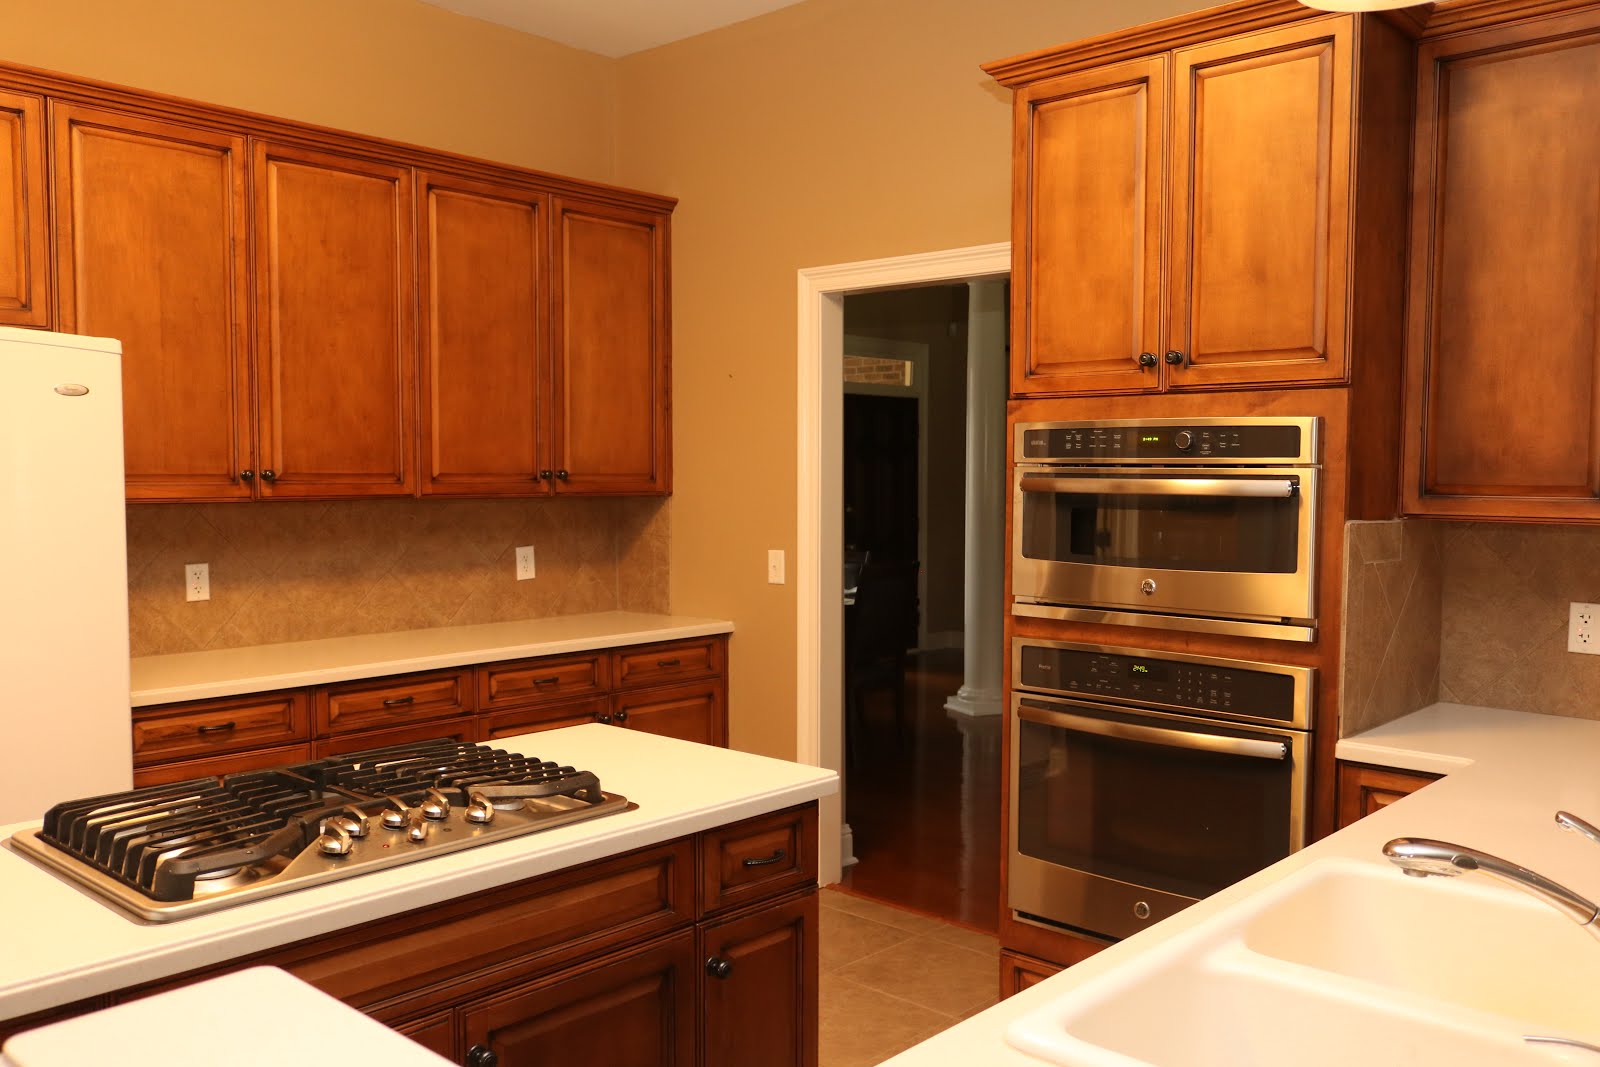 Kitchen with tall/large cabinets; Dining & Great Rooms through doorway (fridge in pic replaced)